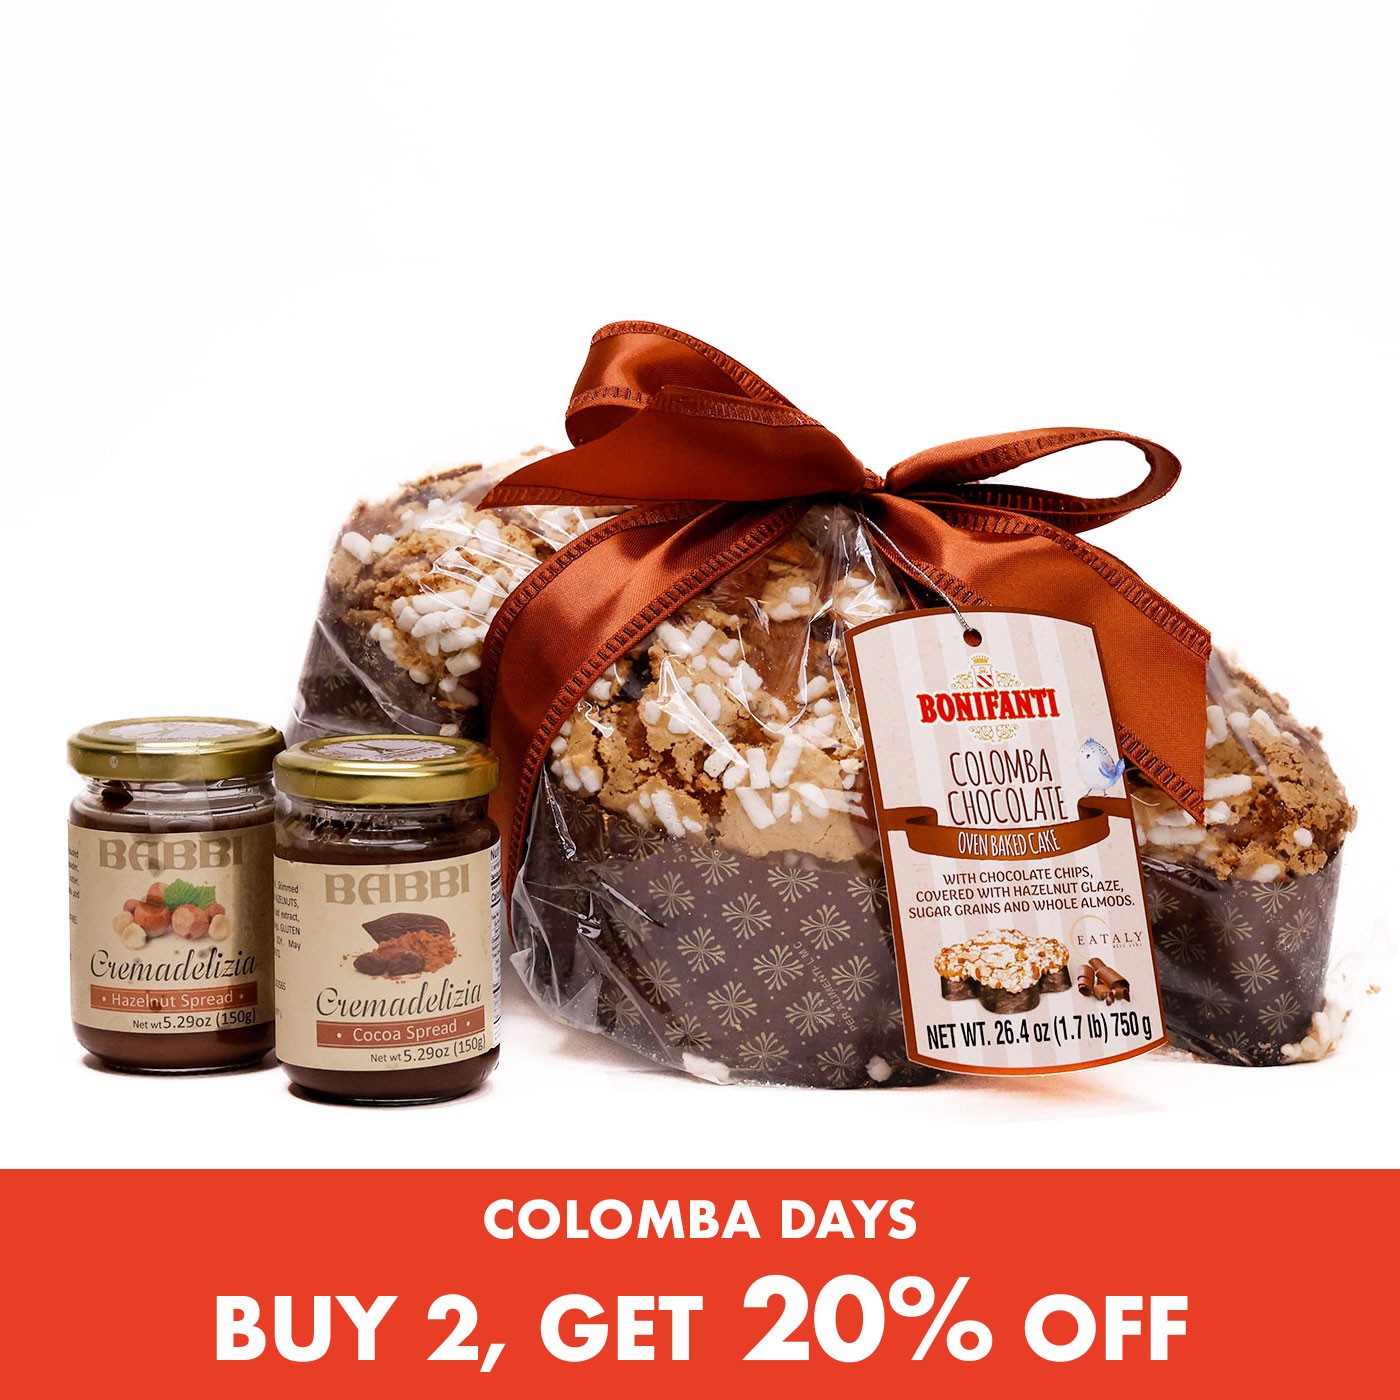 Chocolate Chip Colomba & Sweet Spreads